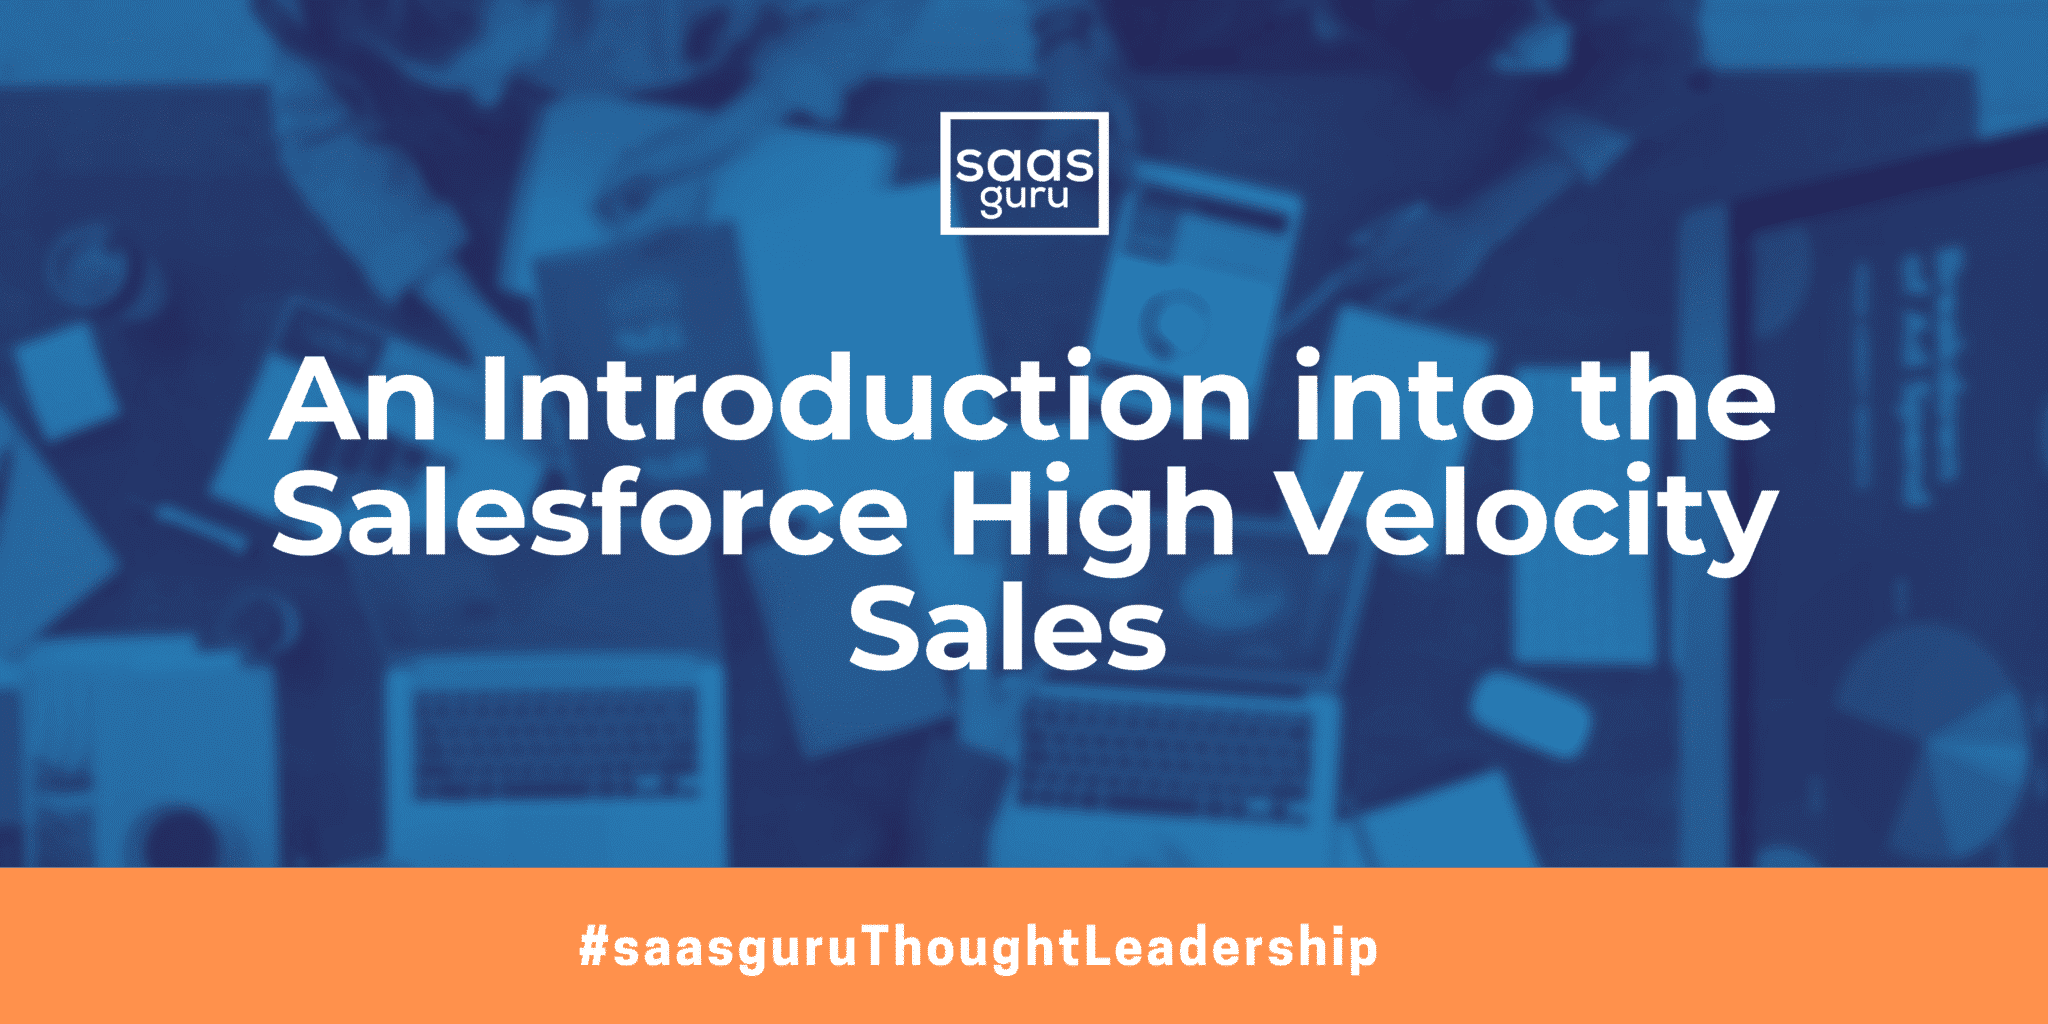 An Introduction into the Salesforce High Velocity Sales